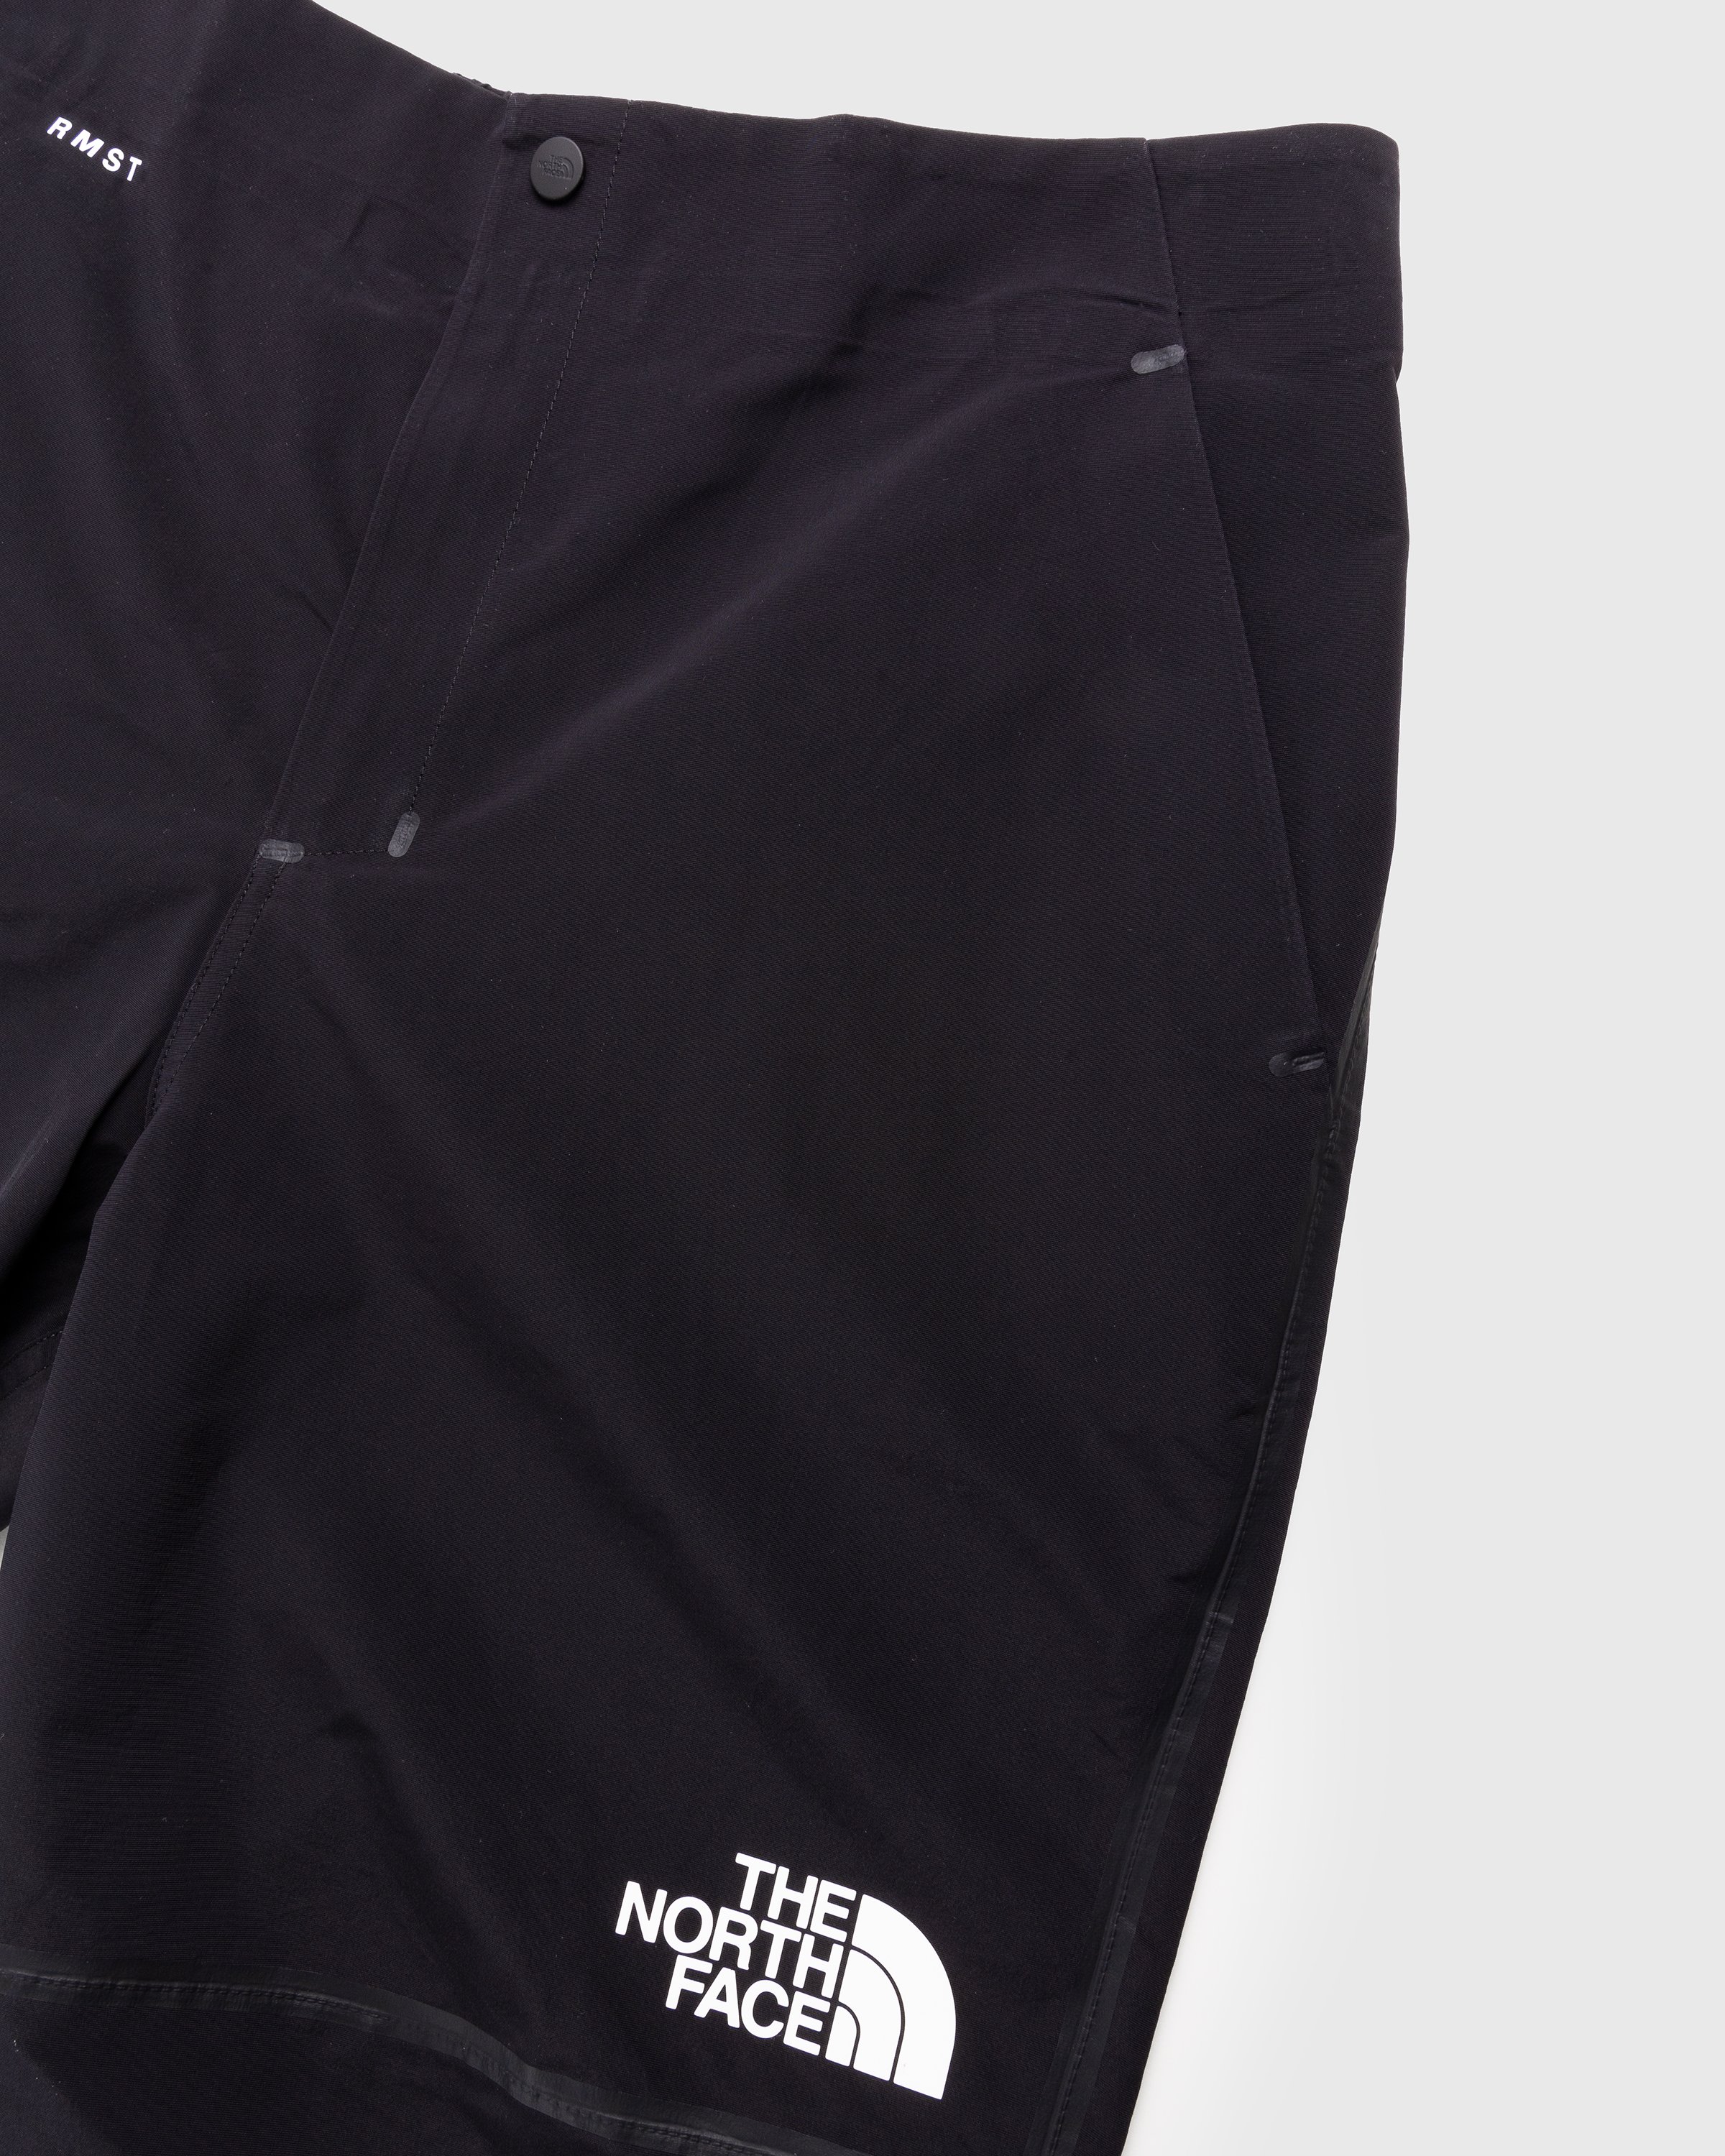 The North Face - RMST Mountain Pant Black - Clothing - Black - Image 5